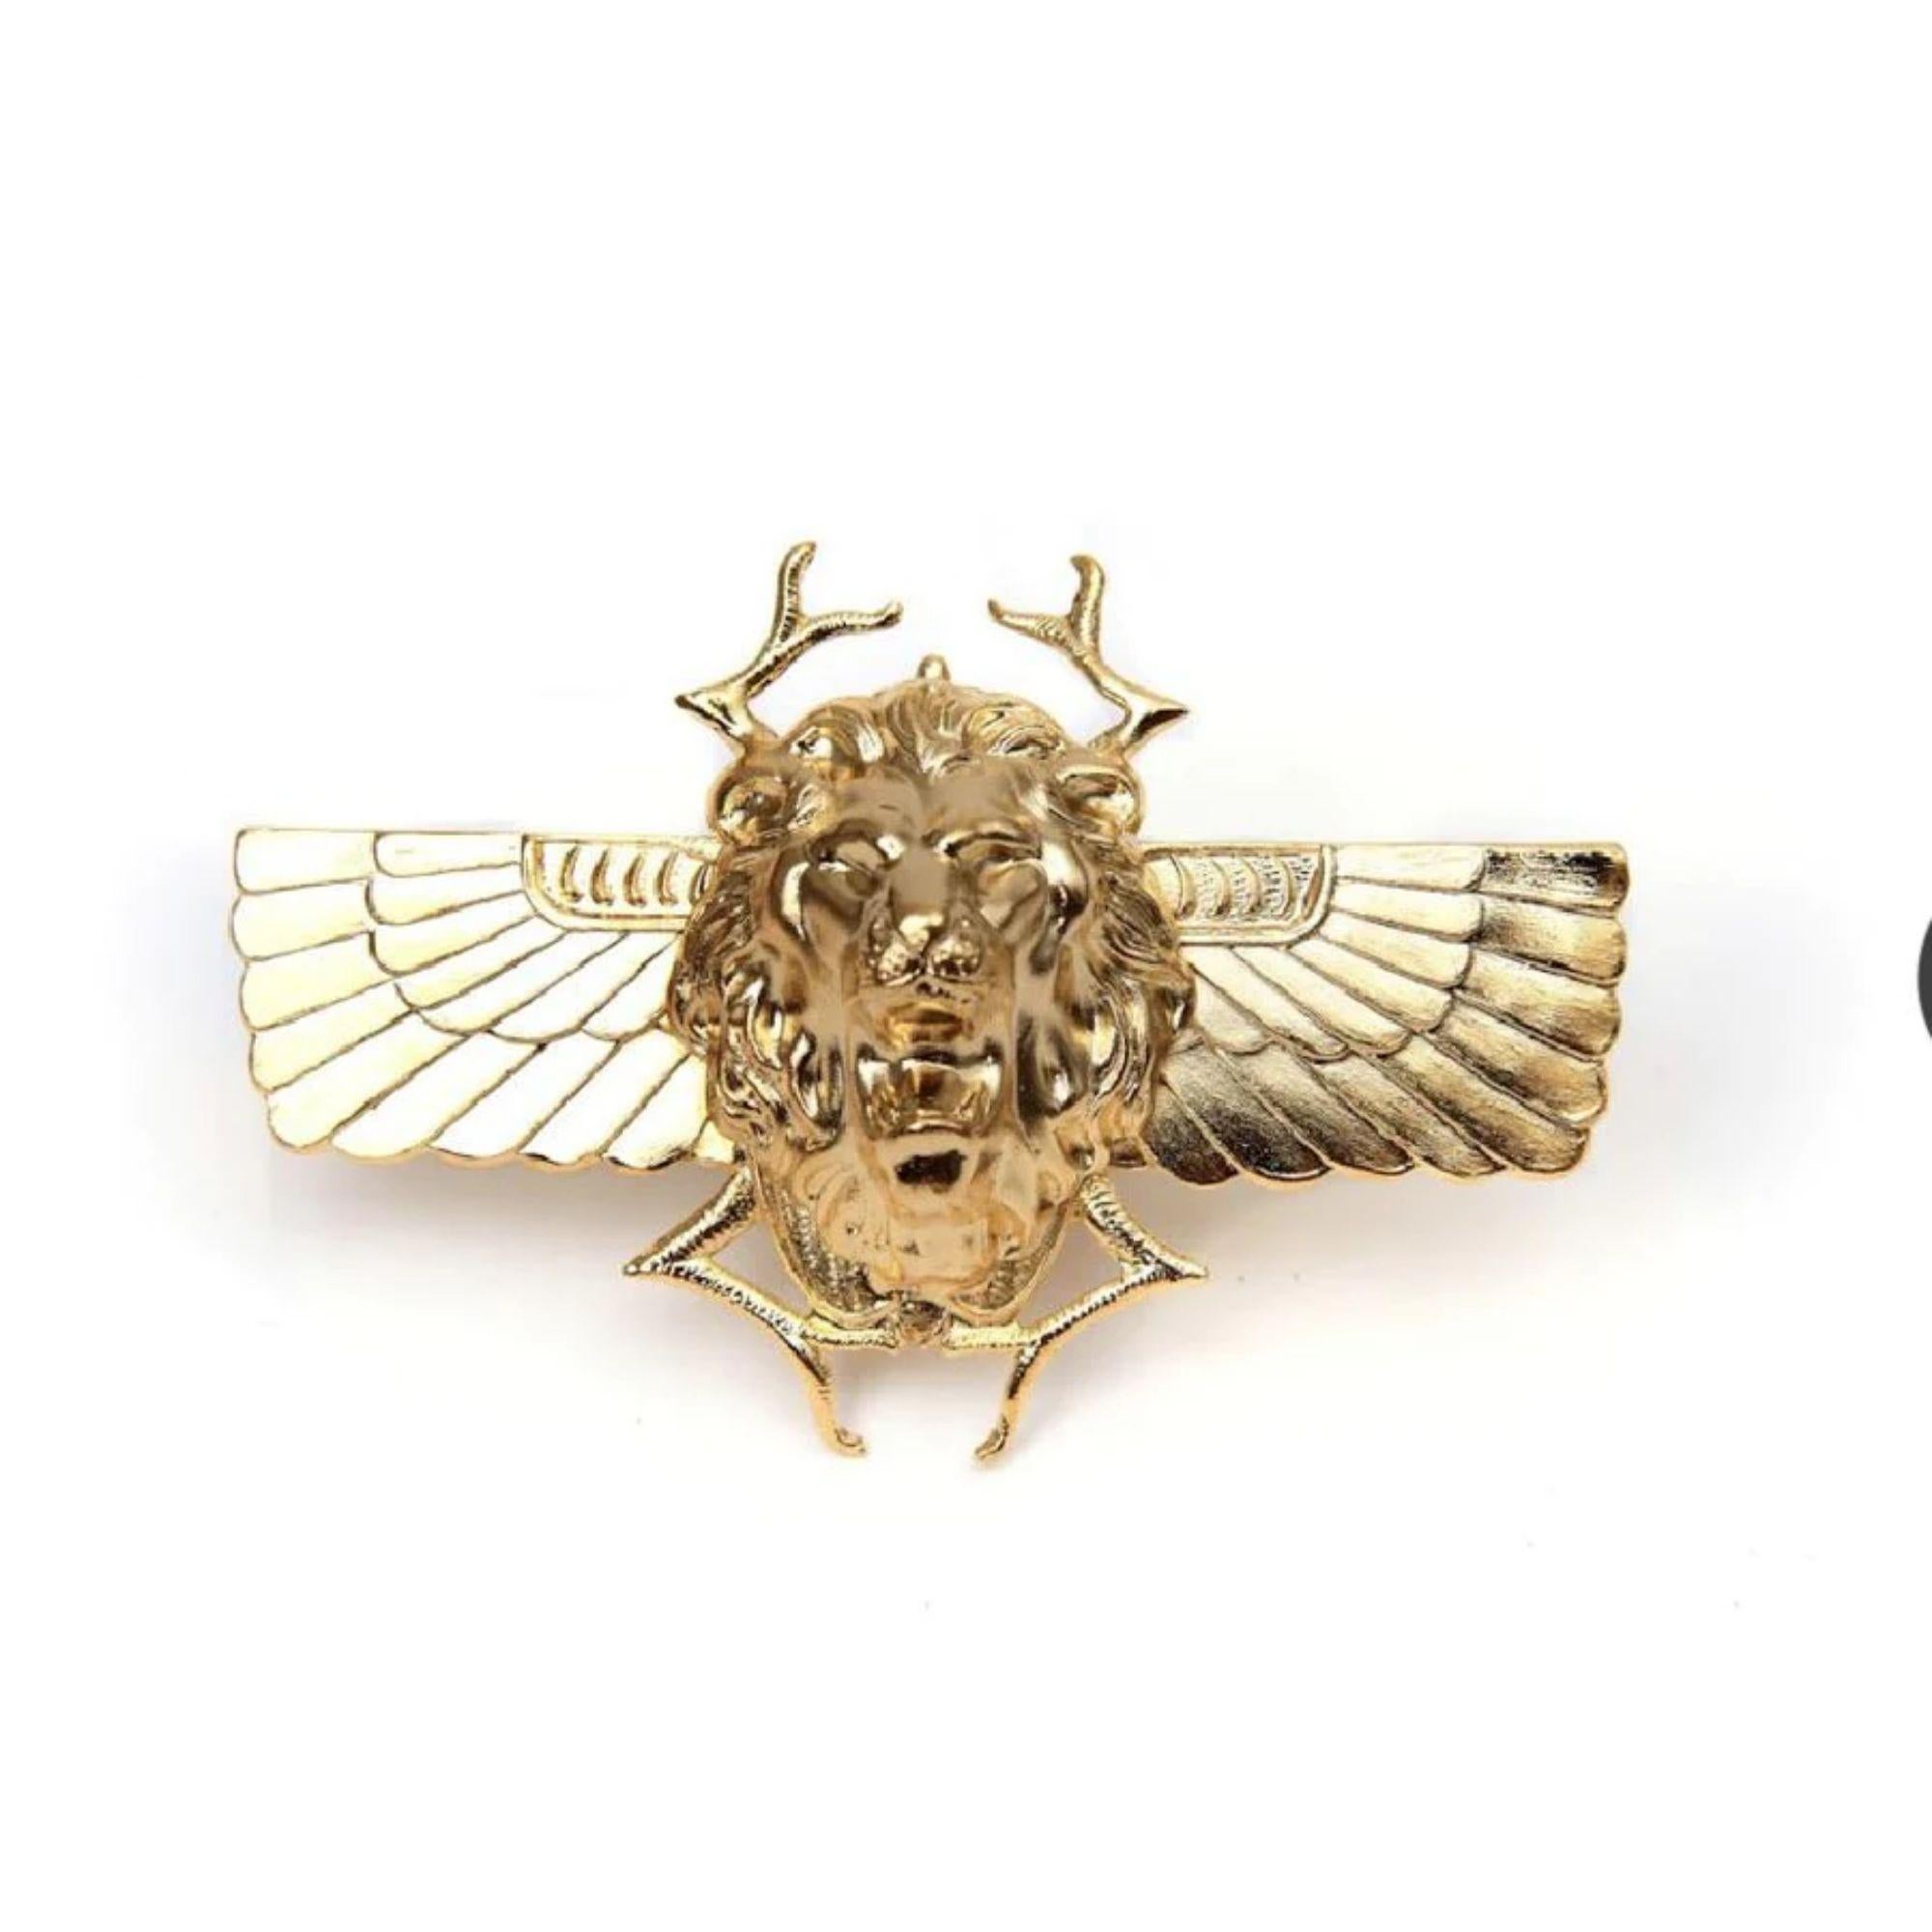 The ultimate power cocktail ring represents Egypt’s scarabs and king lion signifying strength and ultimate luxury. Channel your inner Cleopatra. Made in America. Gold plated on Brass.

Additional Information:
Material: 24K Gold, Brass
Dimensions: W